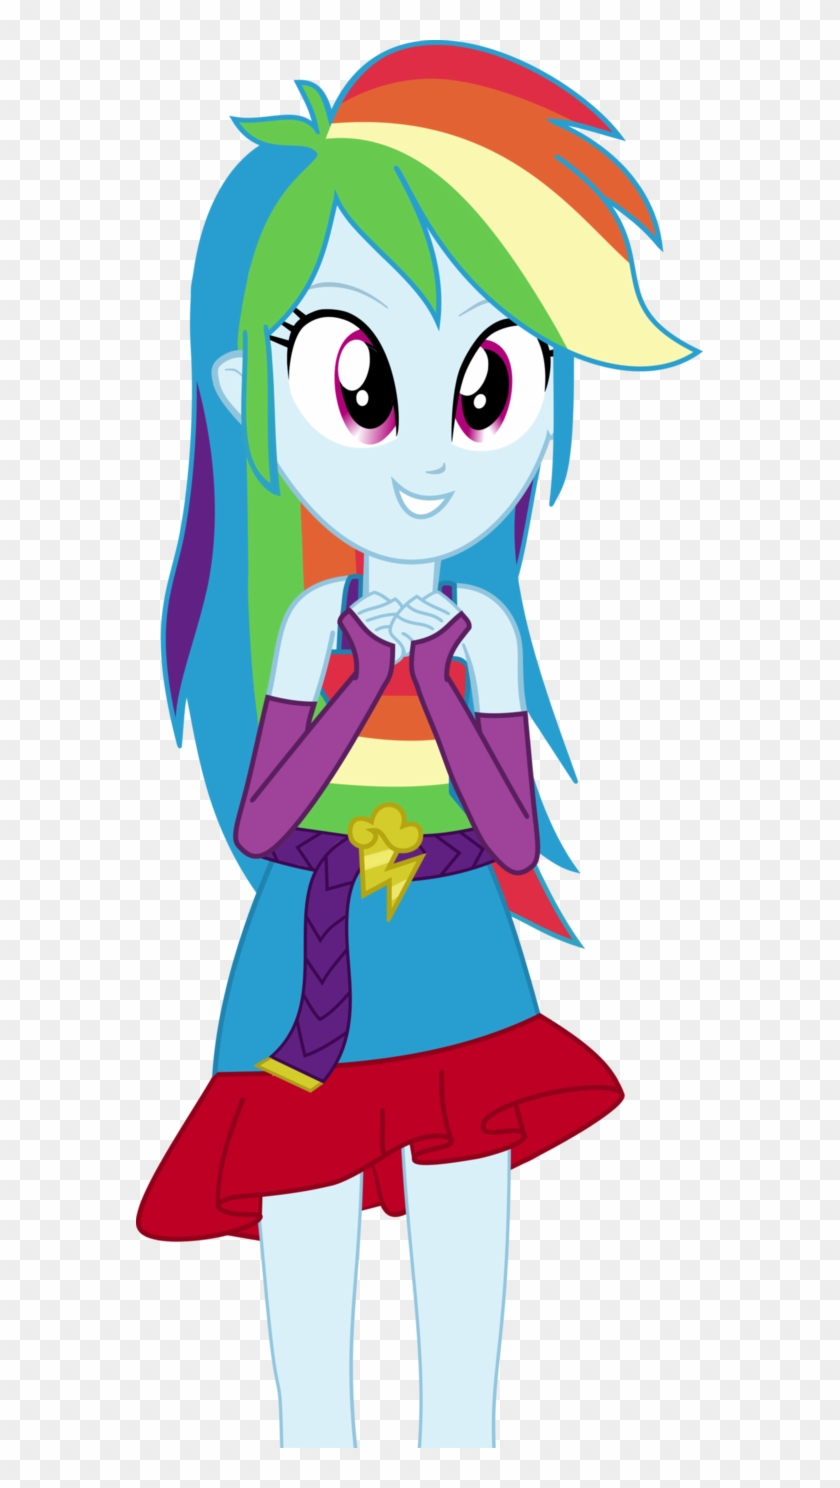 Rainbow Dash Excited Equestria Girl By Darksoul46 On - Rainbow Dash Equestria Girl #327857